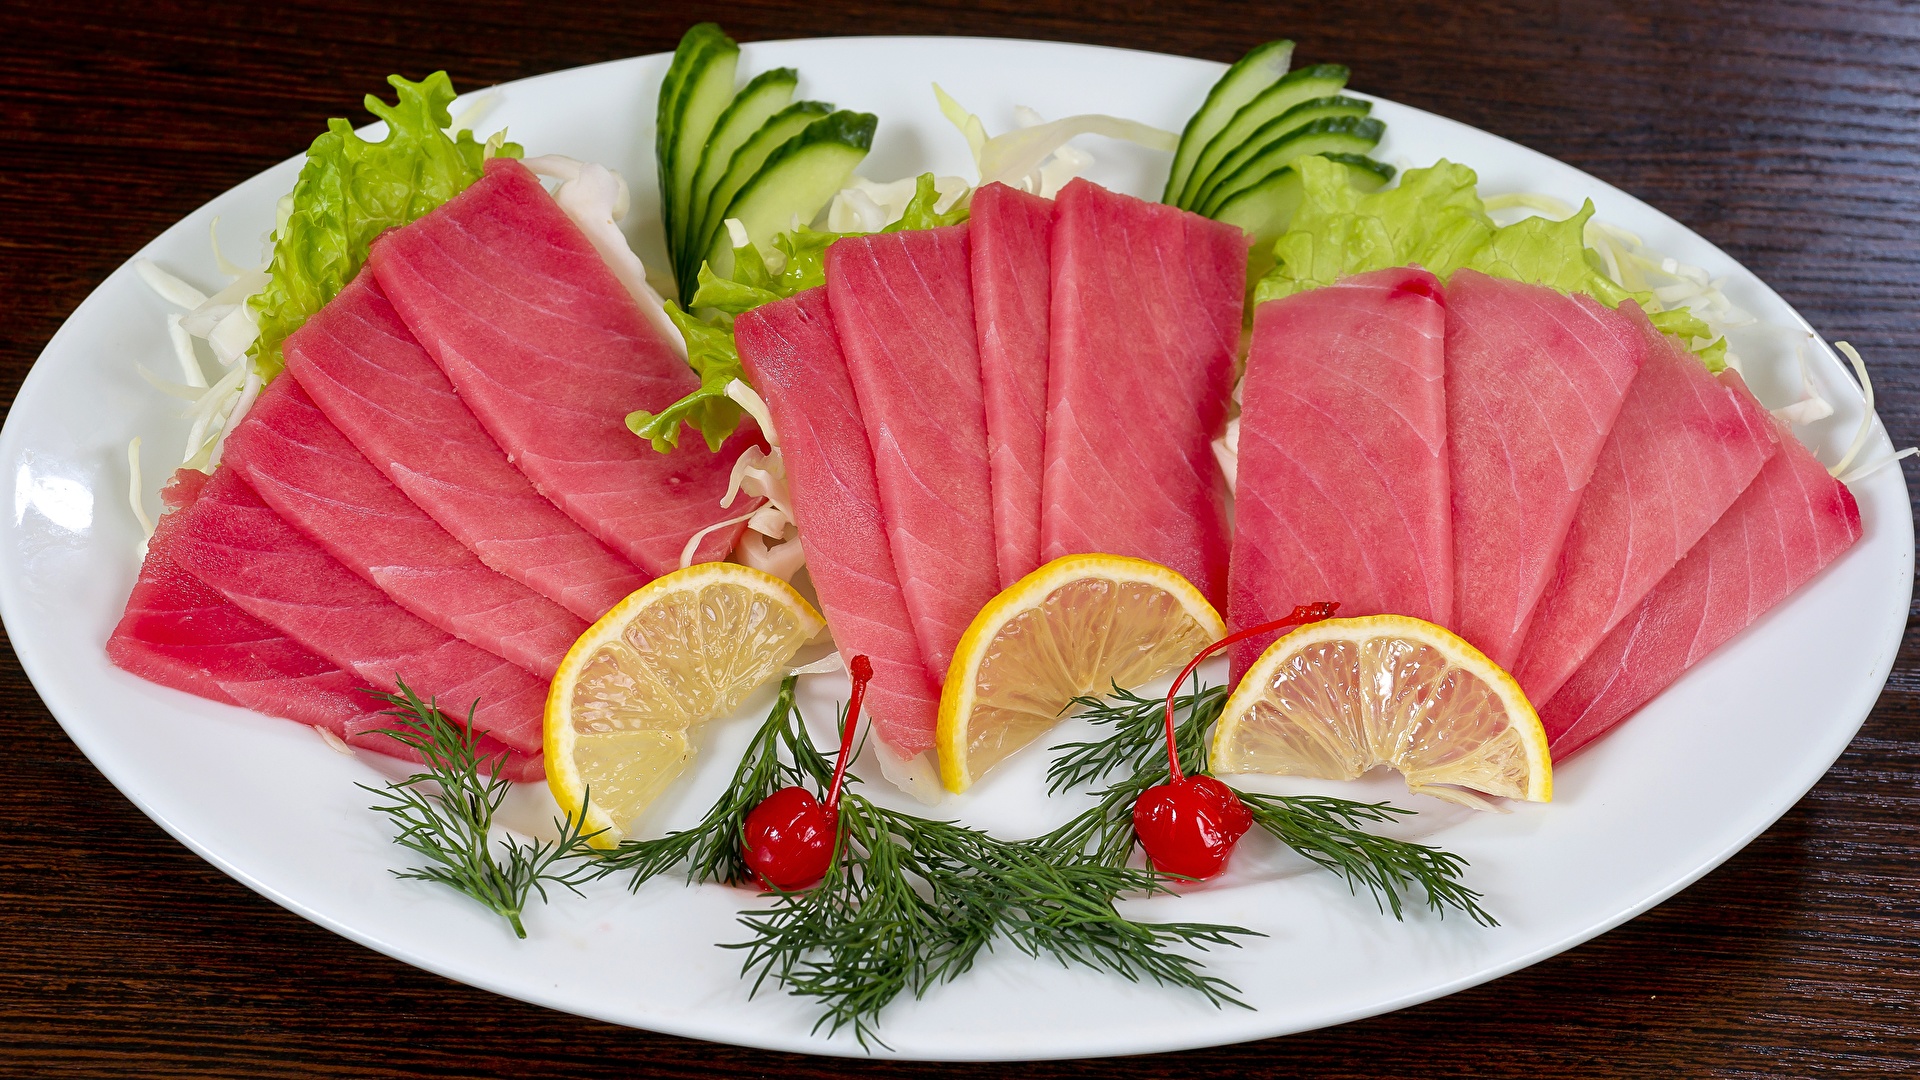 Picture Tuna Dill Lemons Fish Food Plate Sliced